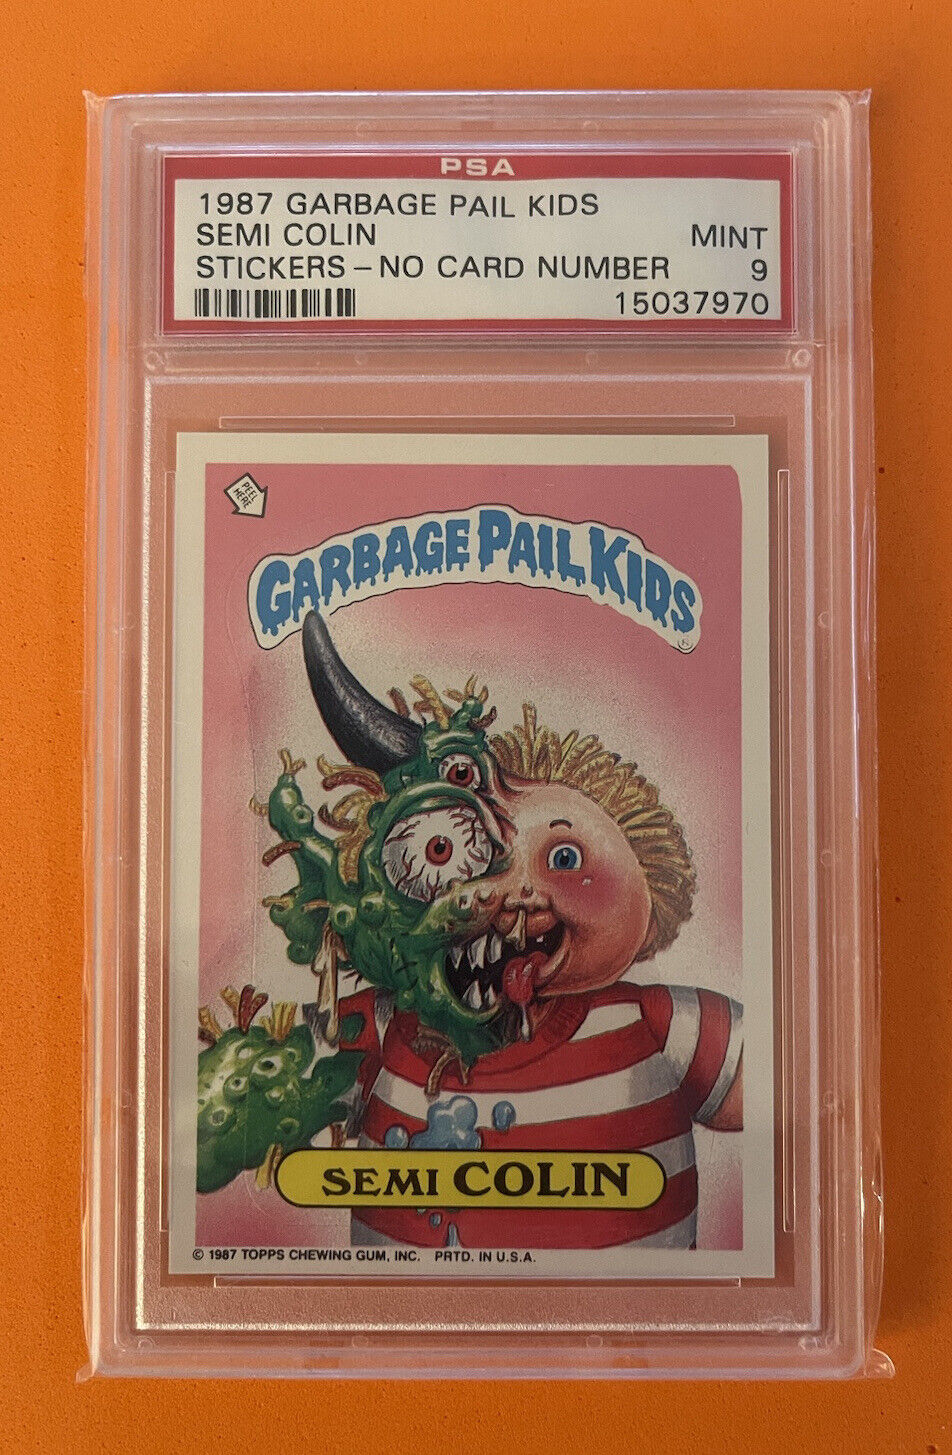 1987 Topps Garbage Pail Kids SEMI COLIN NO CARD NUMBER ERROR PSA 9 MINT Centered